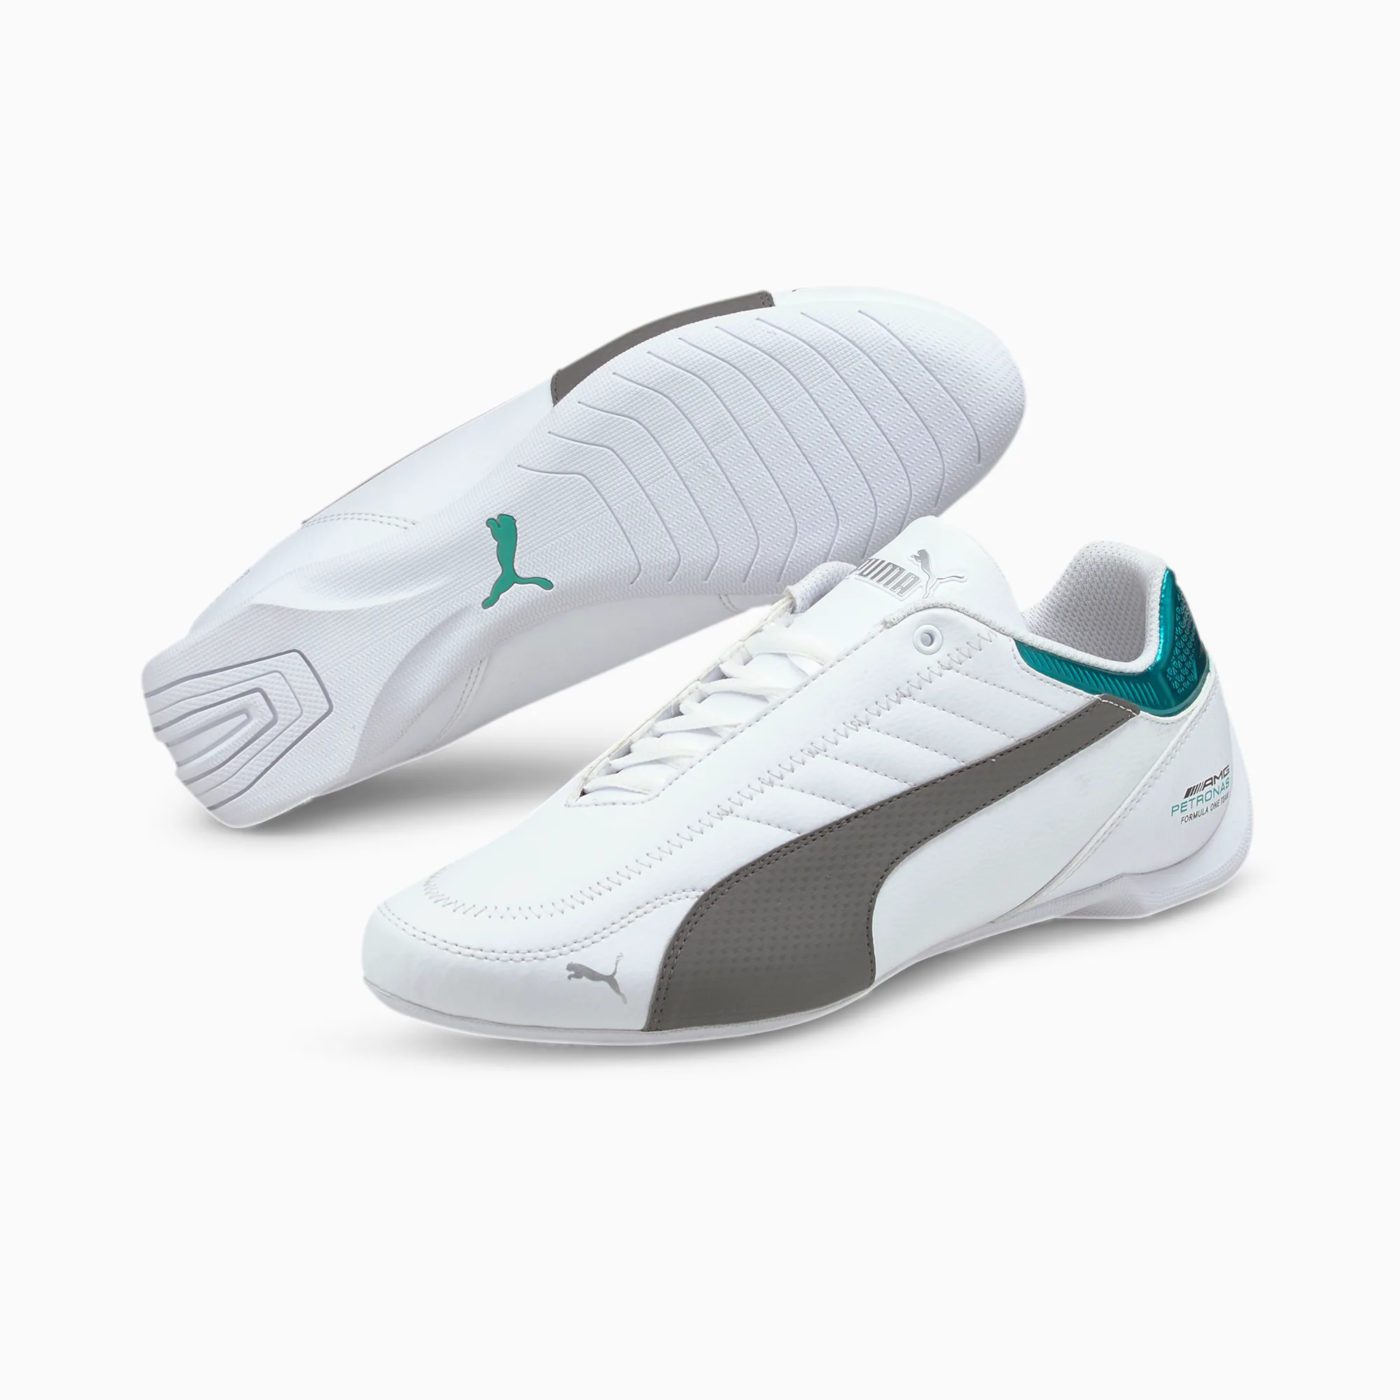 marking architect lonely The New Puma x Mercedes-AMG Petronas Future Kart Kat Sneakers Now Available